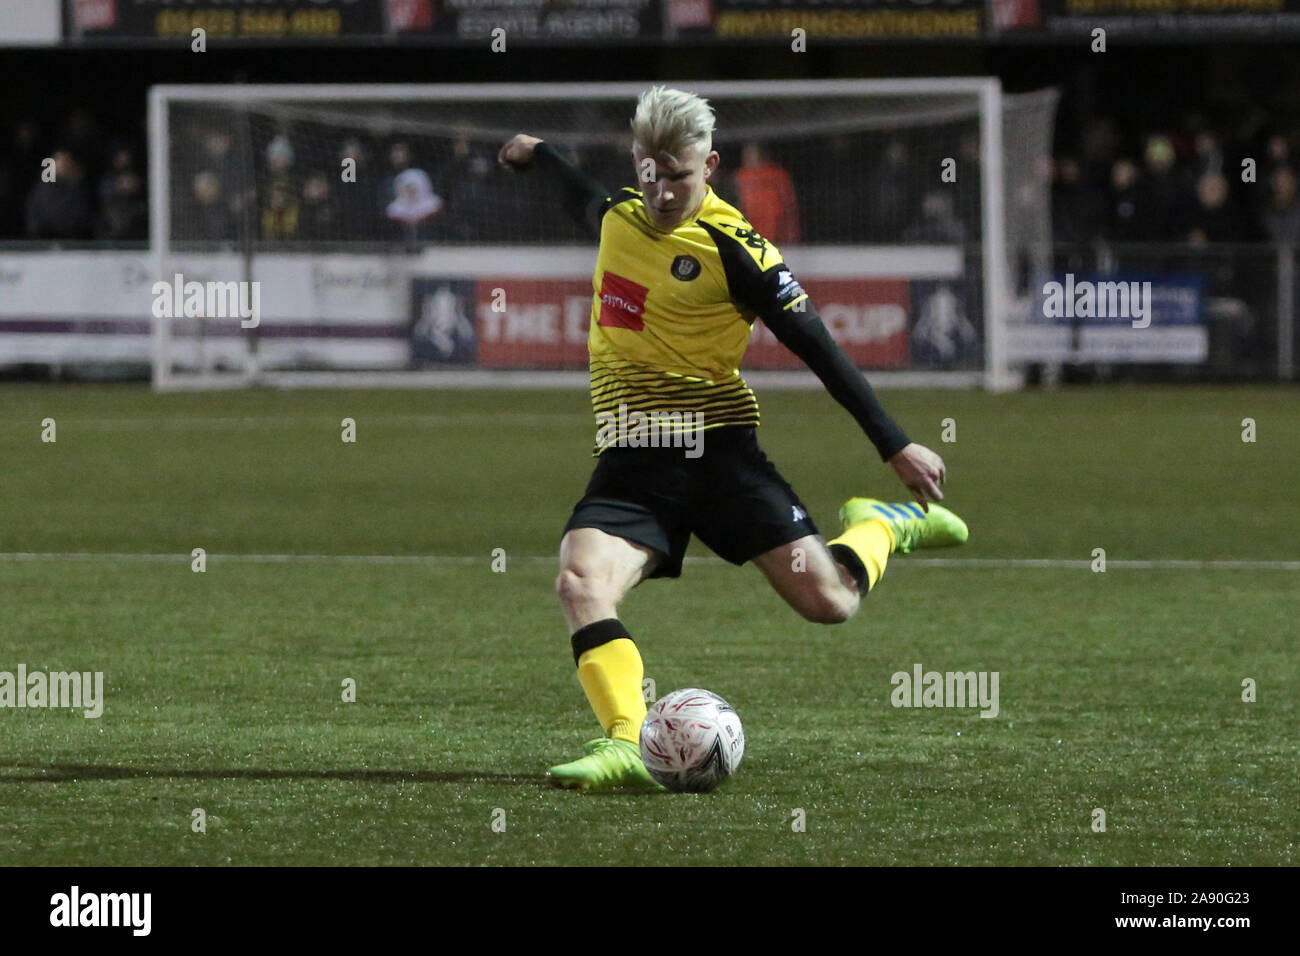 HARROGATE, ENGLAND - NOVEMBER 11TH George Smith of Harroigate punts the ball forward during the FA Cup 1st round match between Harrogate Town and Portsmouth at Wetherby Road, Harrogate on Monday 11th November 2019. (Credit: Harry Cook | MI News) Photograph may only be used for newspaper and/or magazine editorial purposes, license required for commercial use Credit: MI News & Sport /Alamy Live News Stock Photo